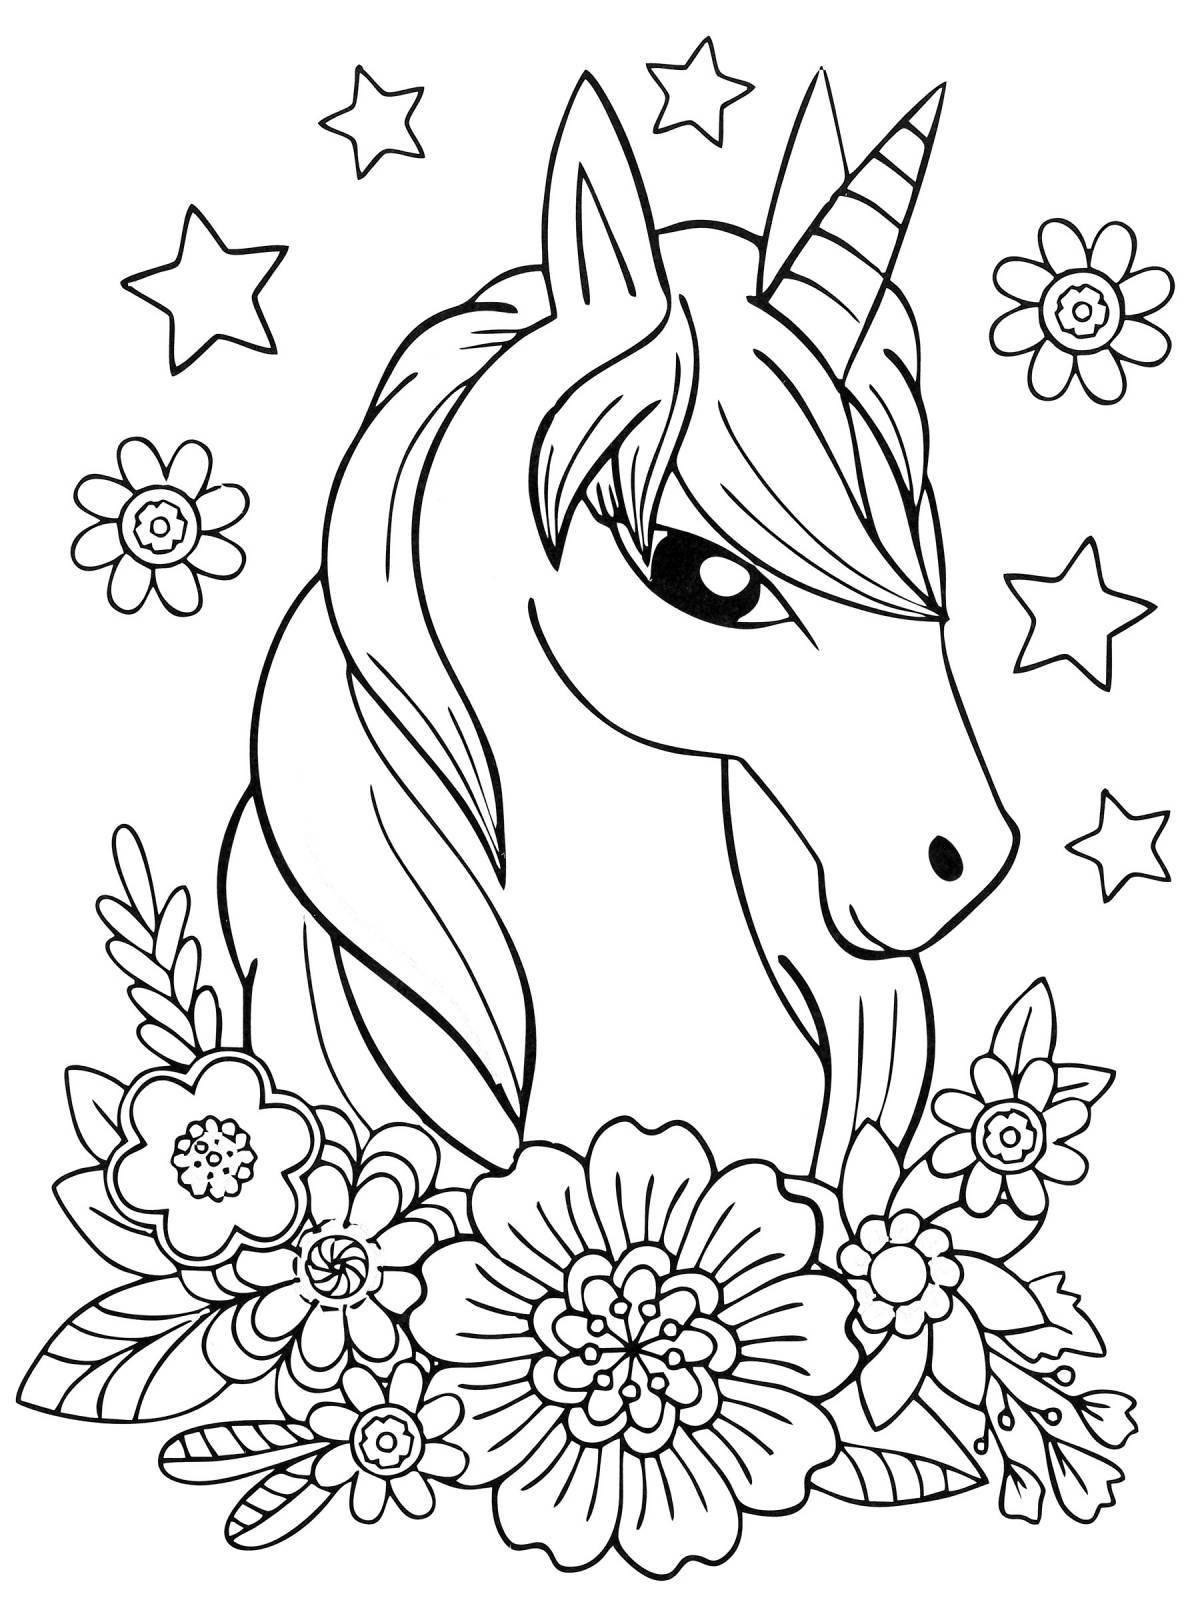 Exquisite coloring book for girls 9-10 years old